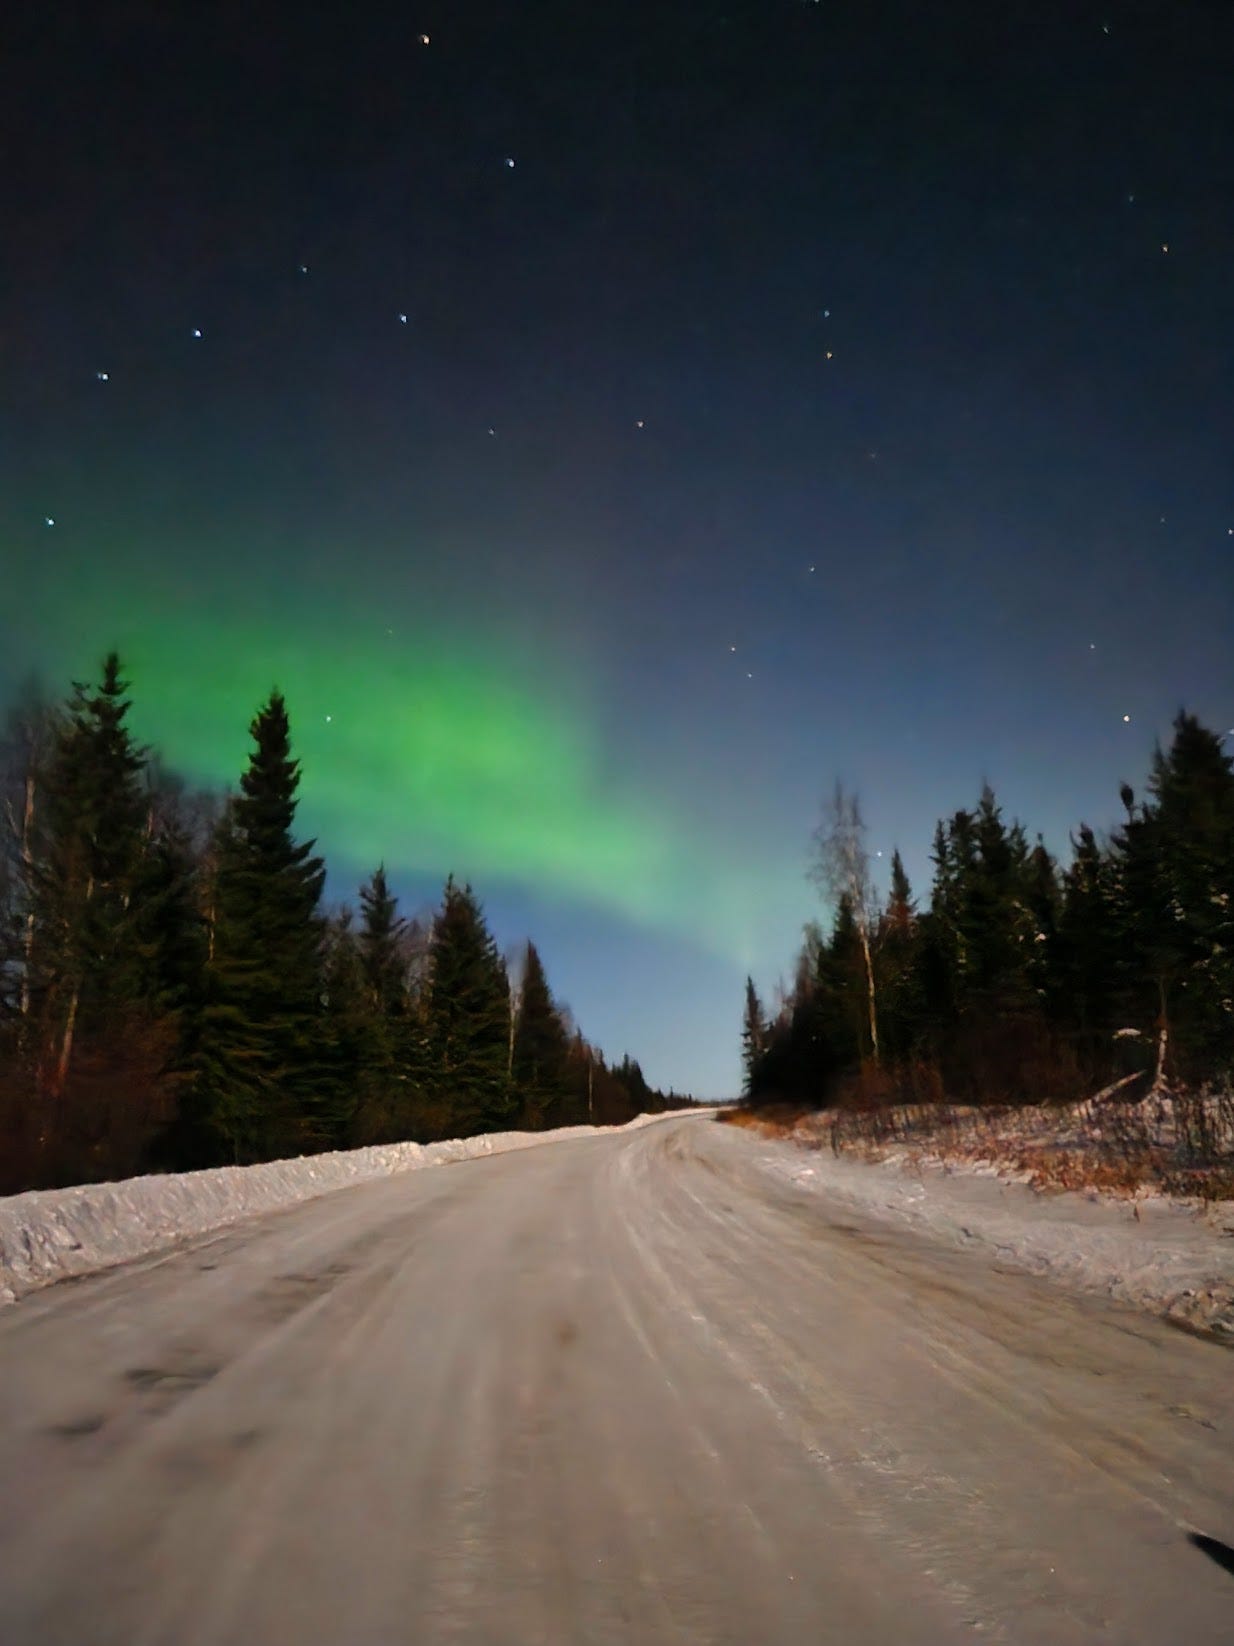 Green aurora over a snowy road and trees